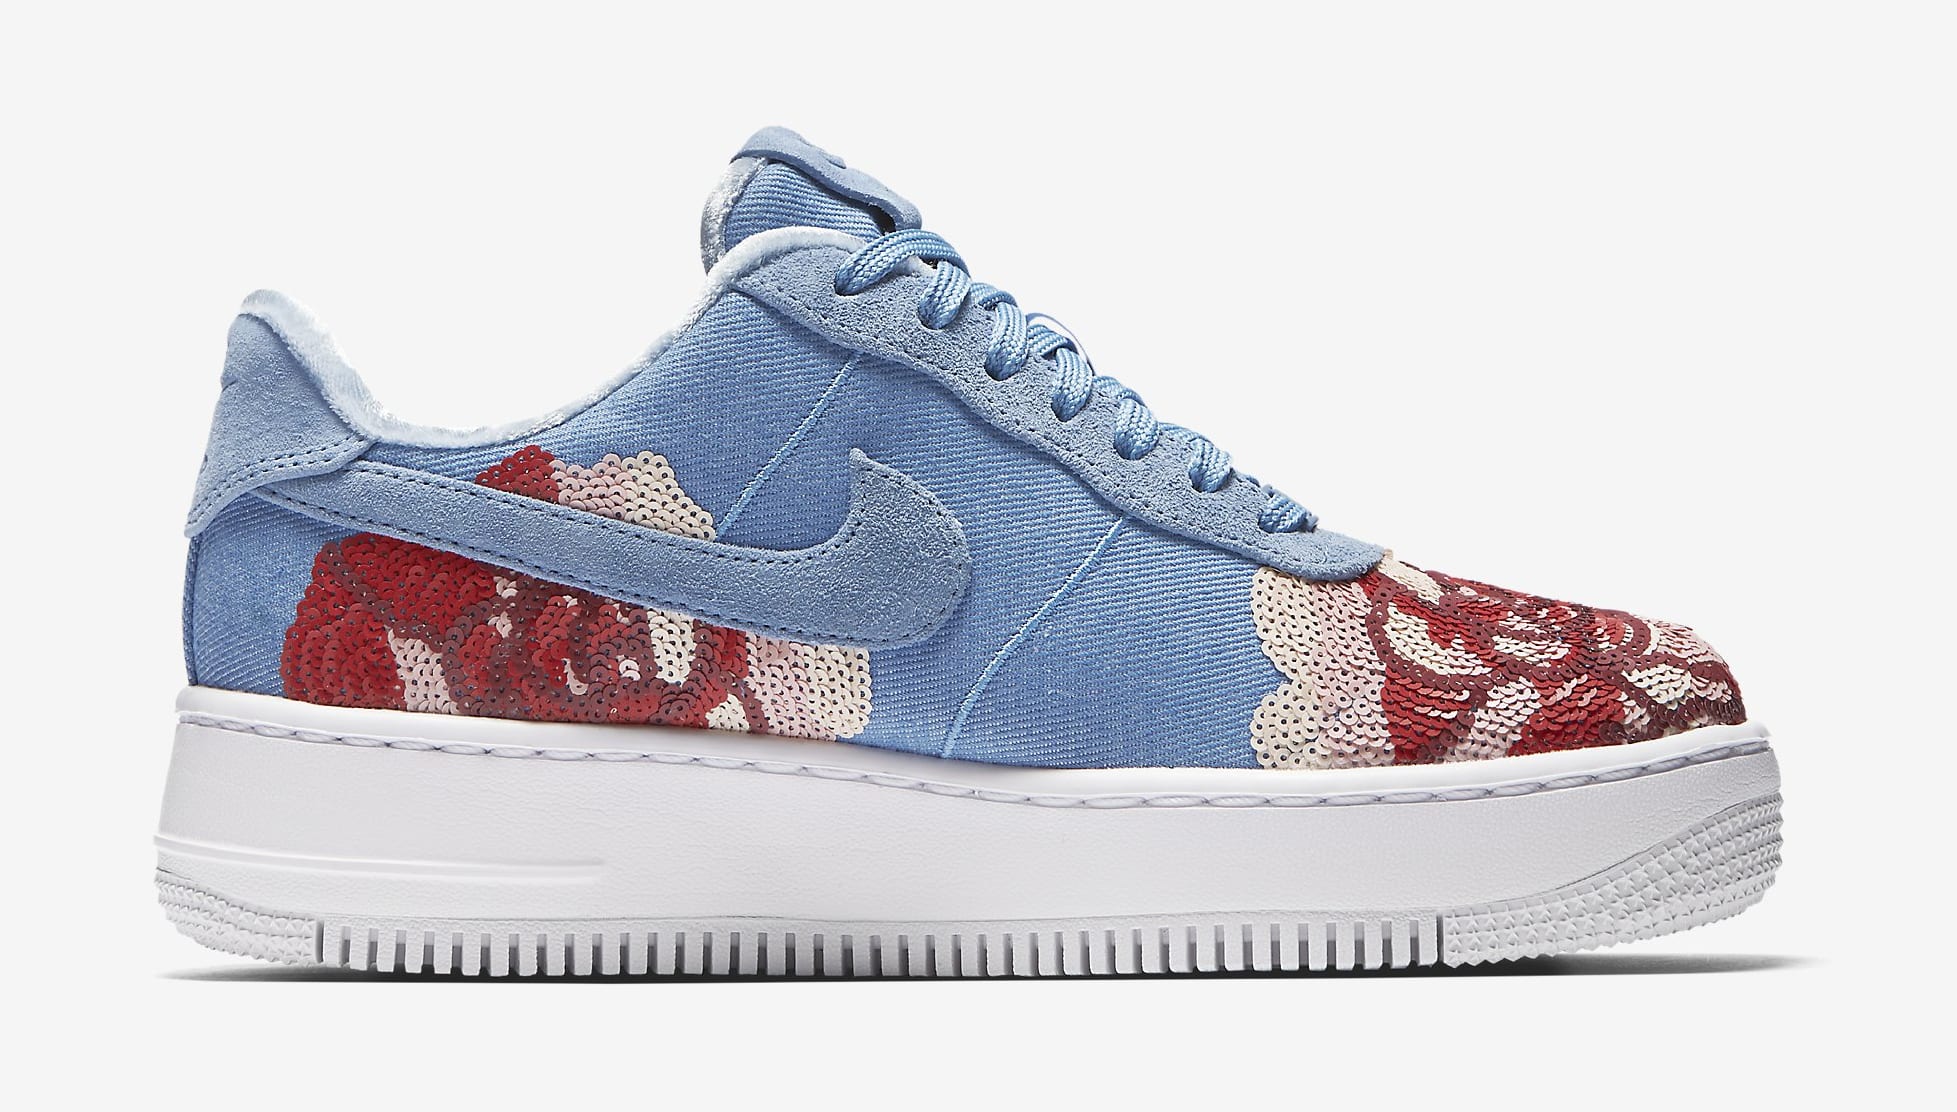 Nike Air Force 1 Low Floral Sequin Pack 898421-402 (Medial)